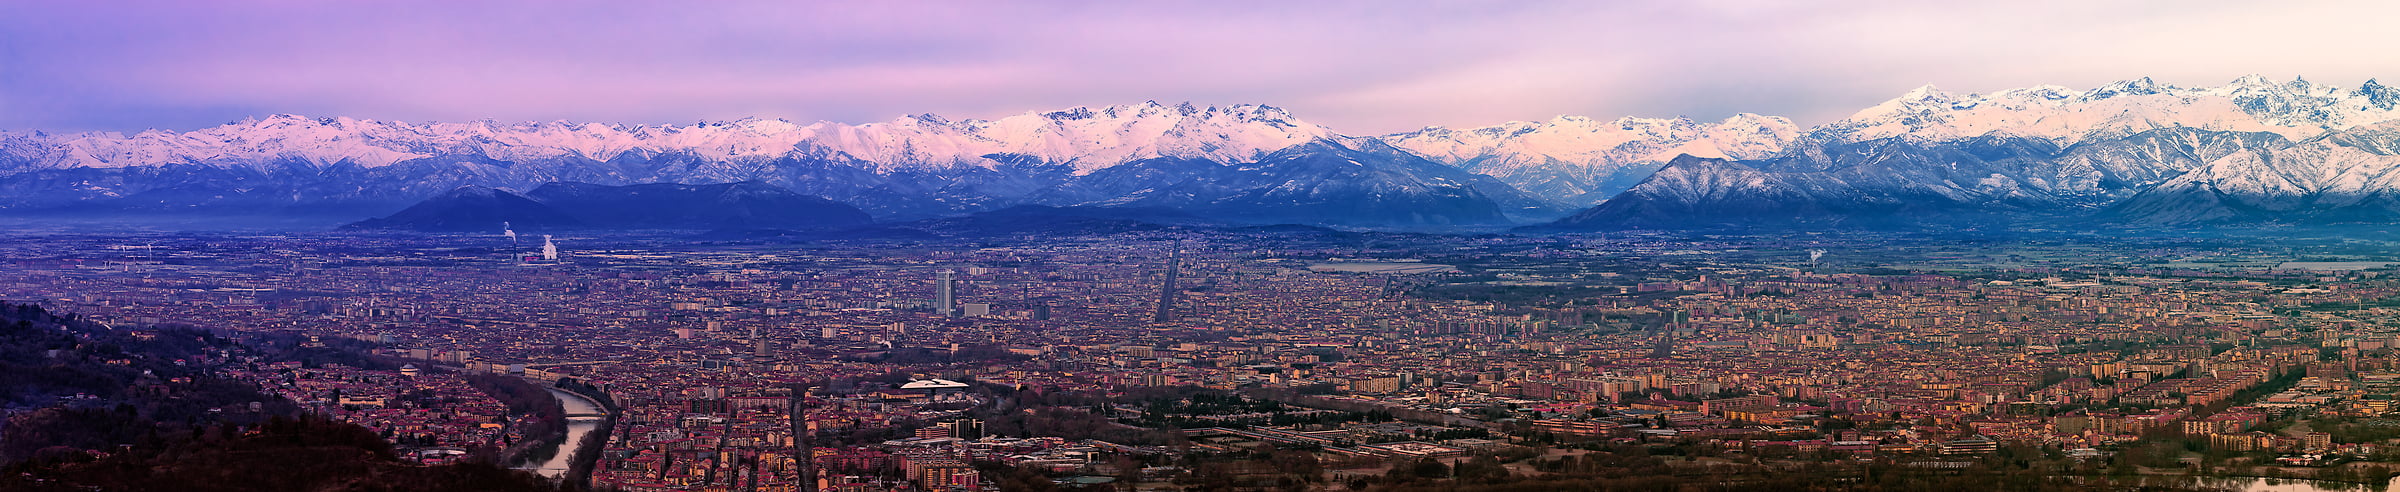 1,093 megapixels! A very high resolution, large-format VAST photo print of the city of Turin, Italy in front of the Alps; landscape photograph created by Duilio Fiorille in Turin, Piedmont, Italy